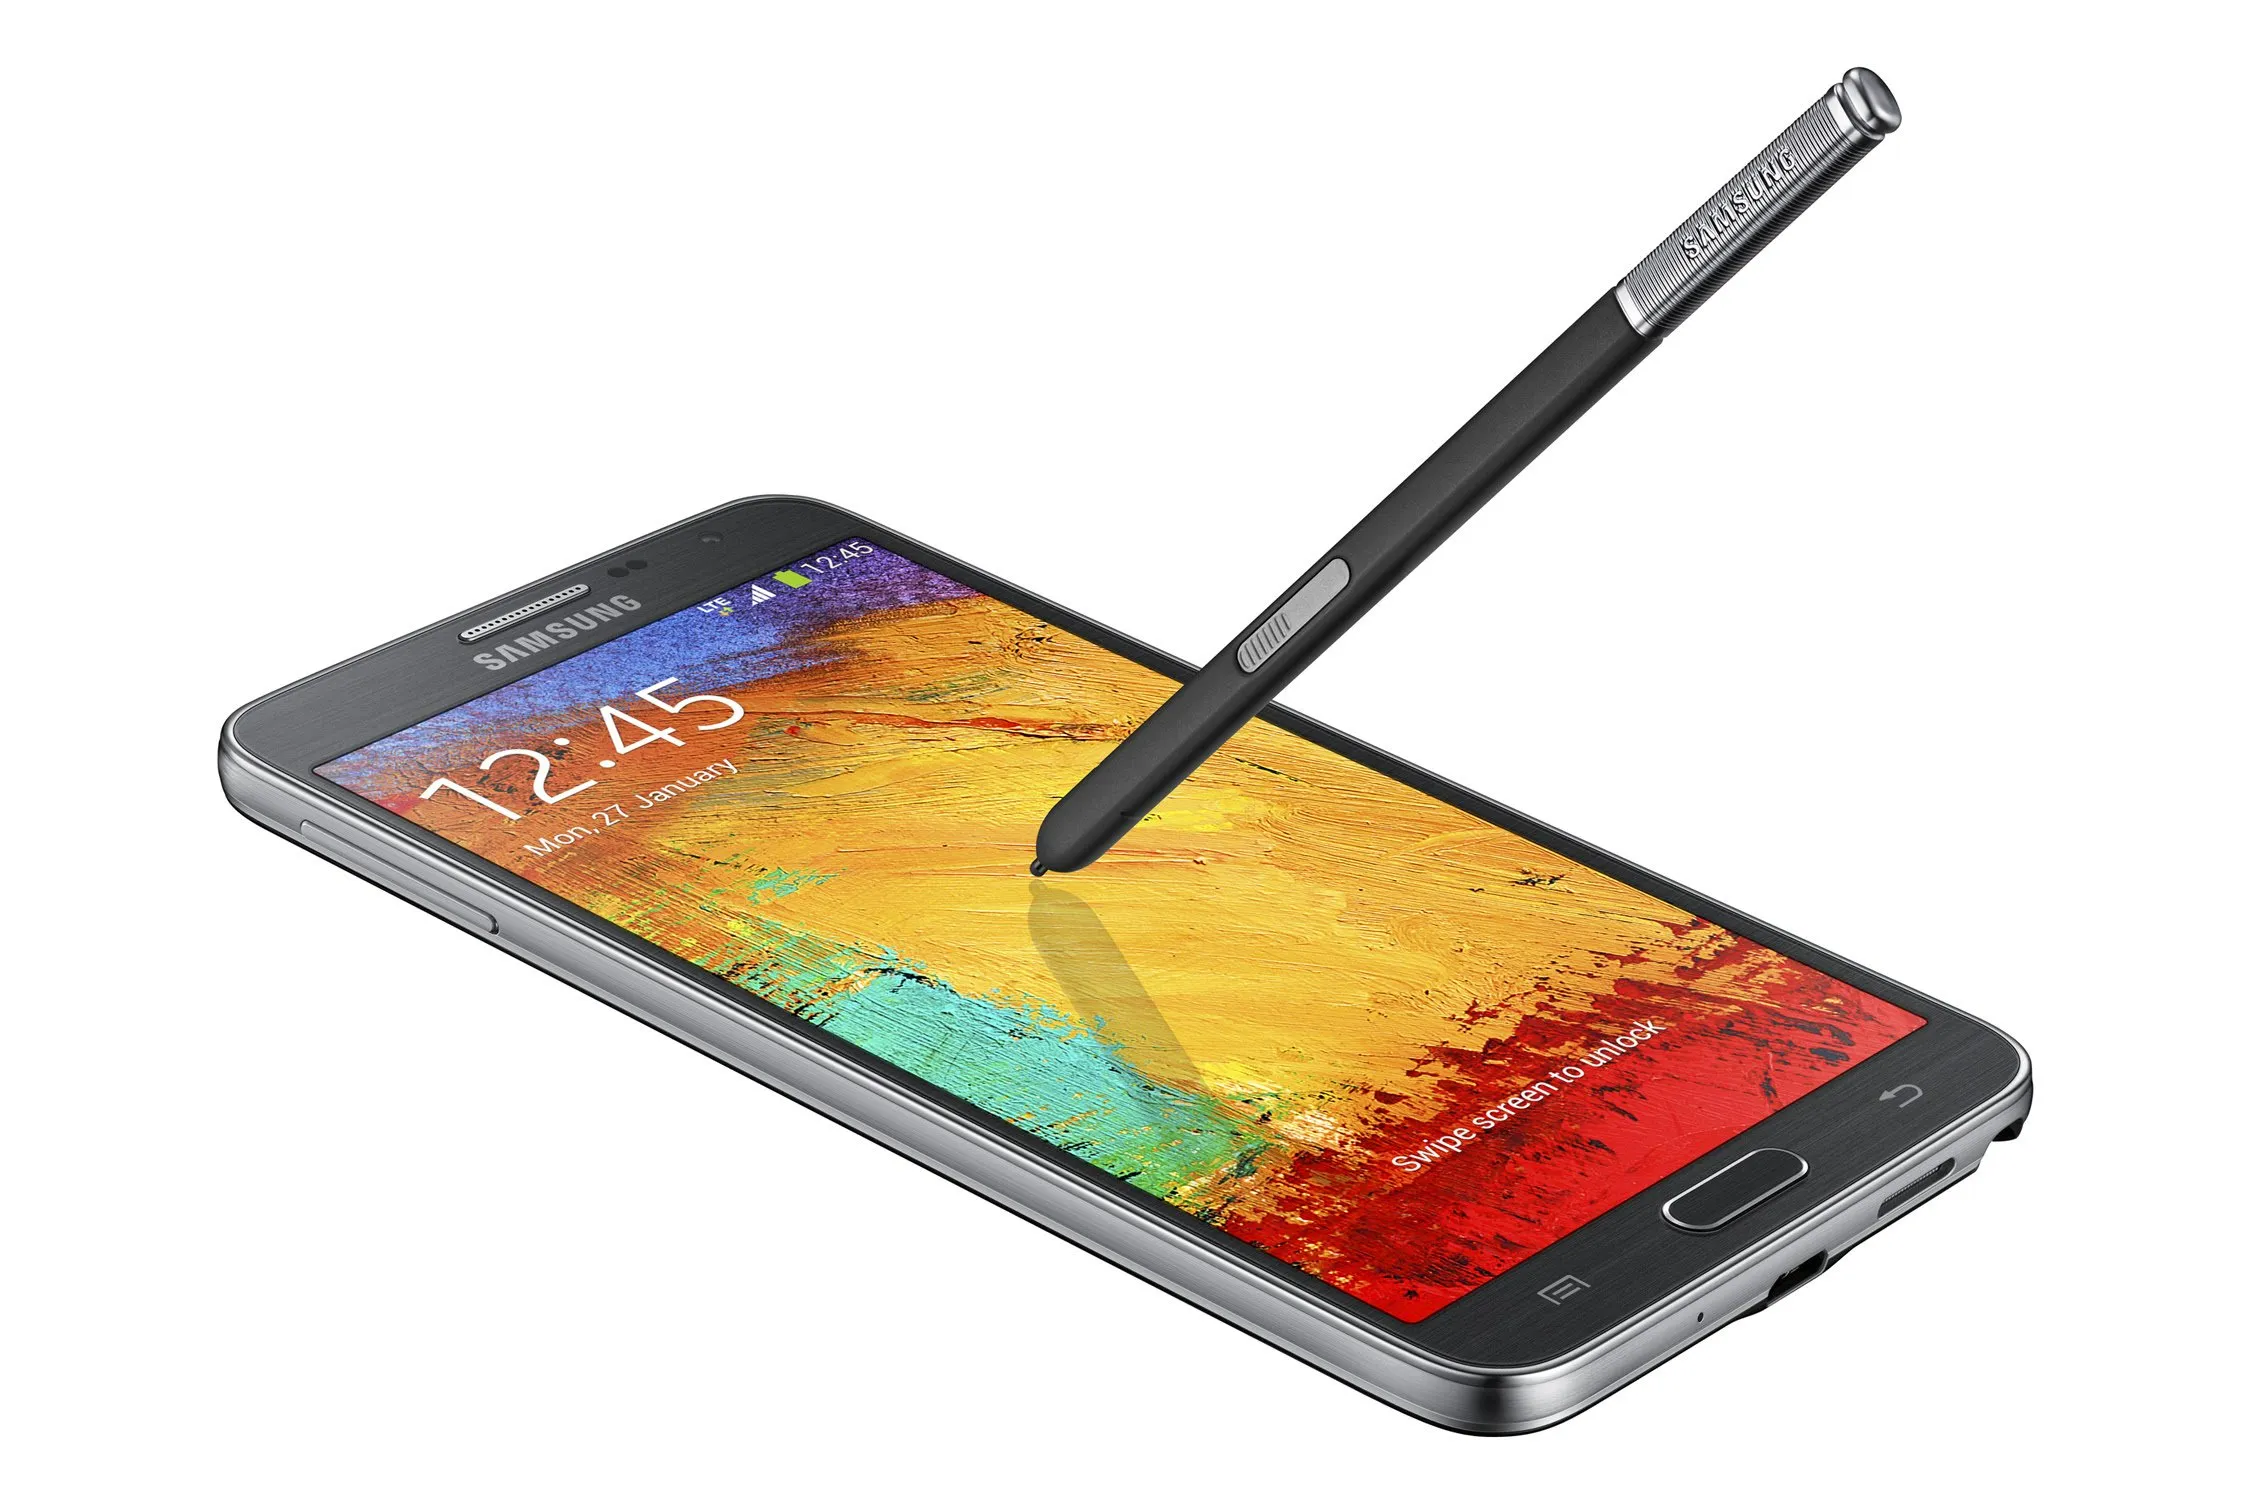 10 Methods to Fix When Mobile Data is not Working onSamsung Galaxy Note 3 Neo